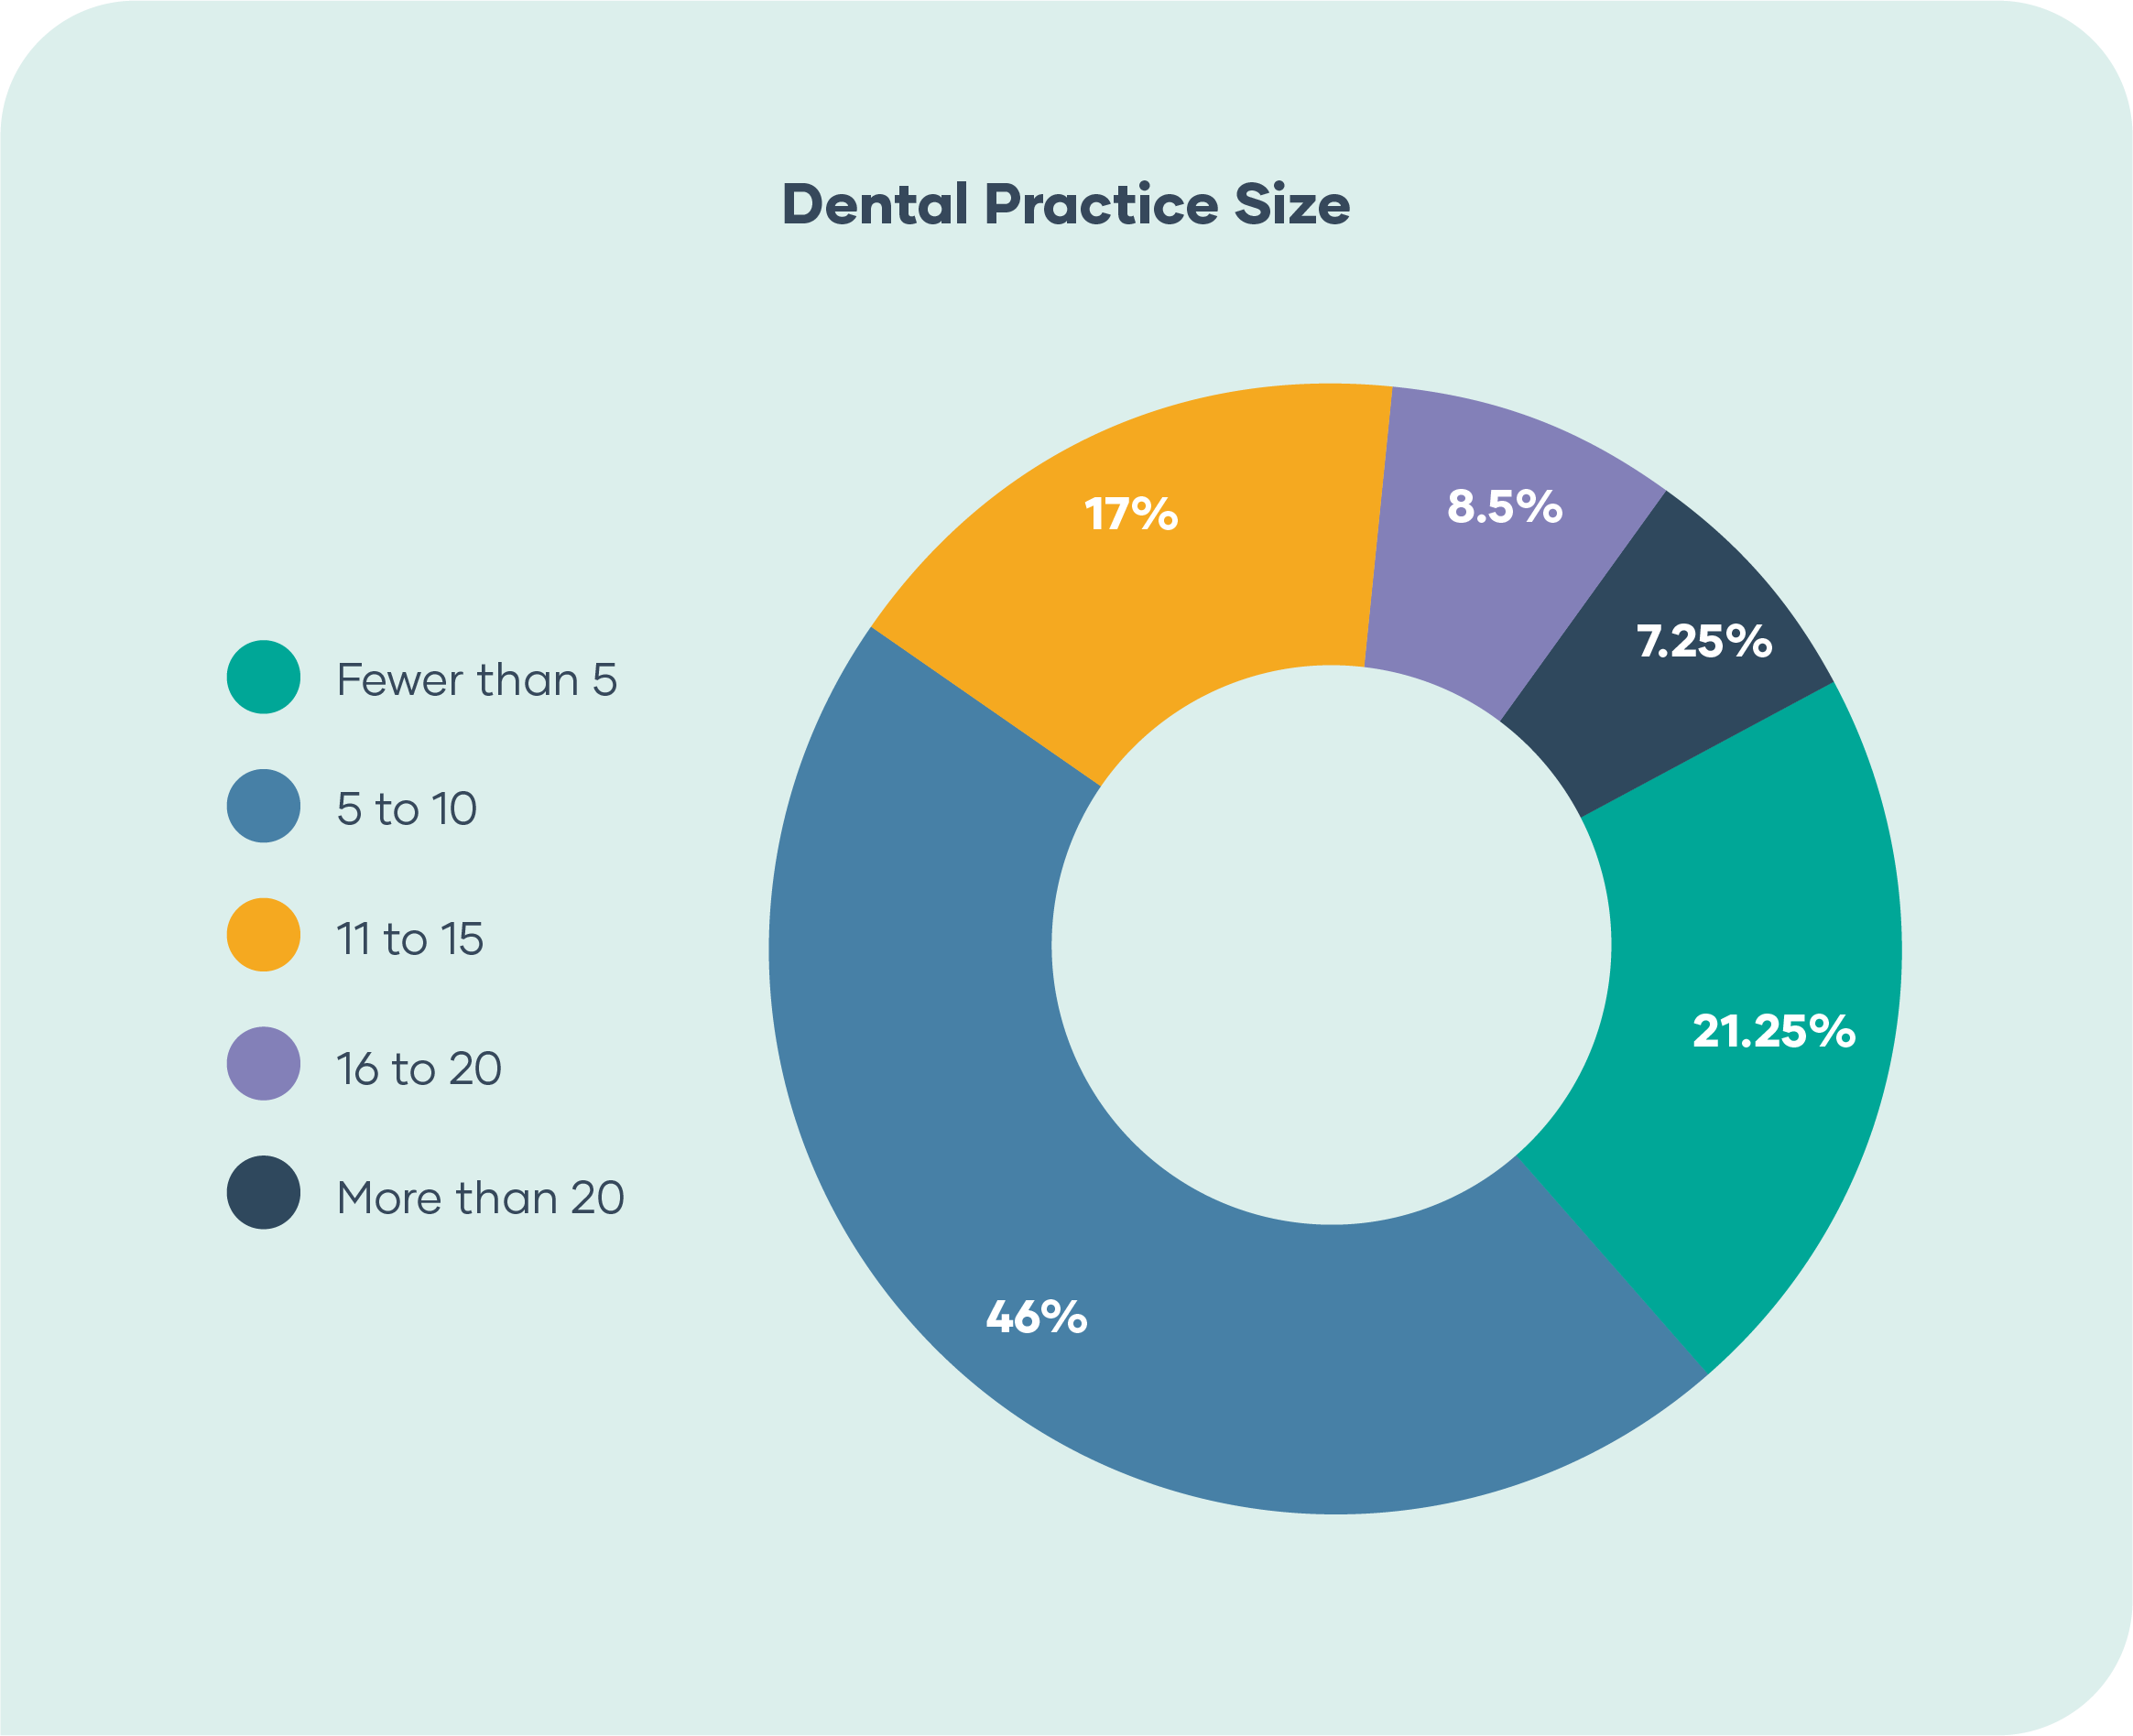 marketing to dentists - Dental Practice Size